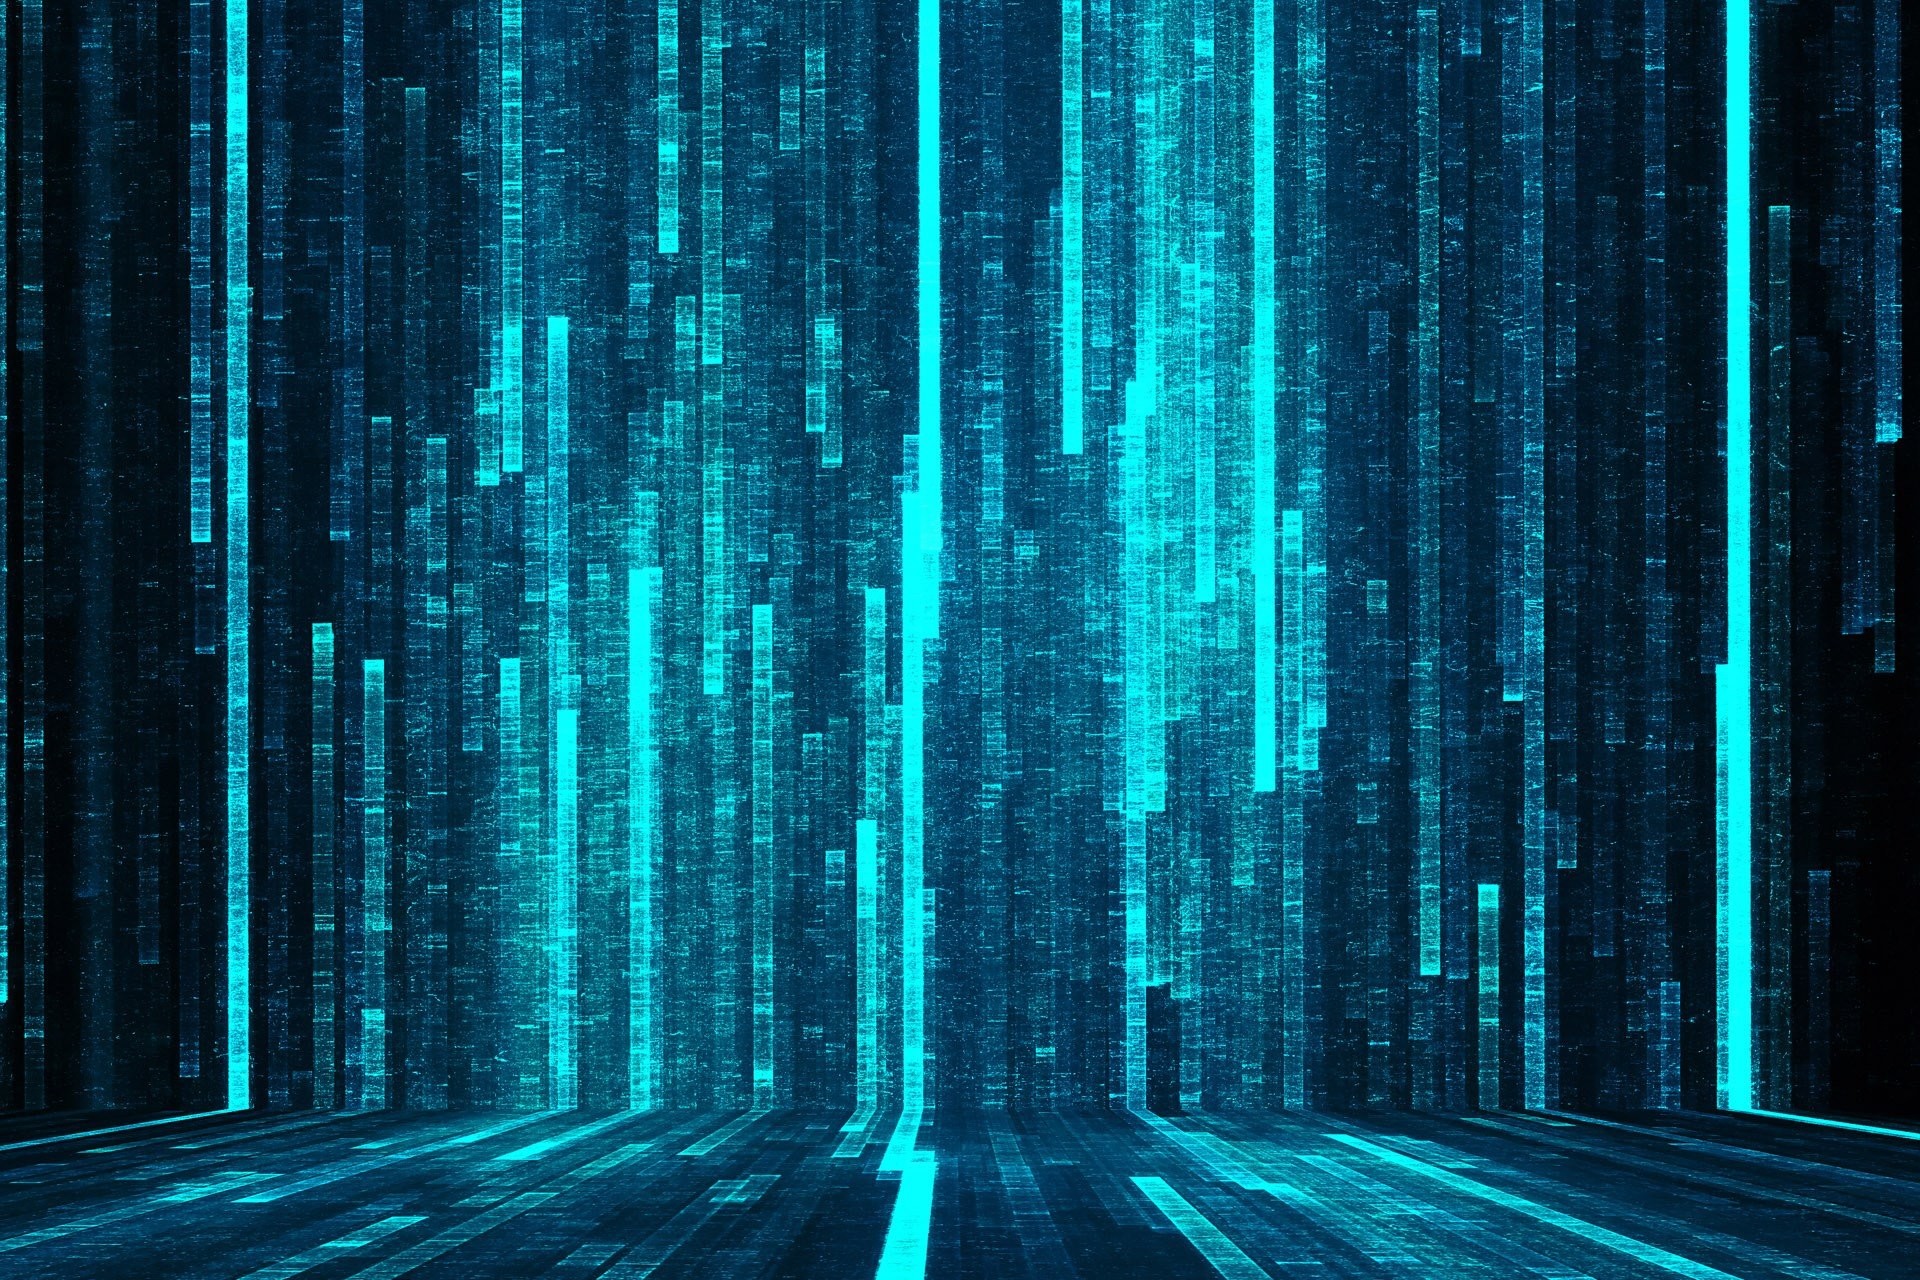 Moving Binary Code Wallpaper (62+ images)